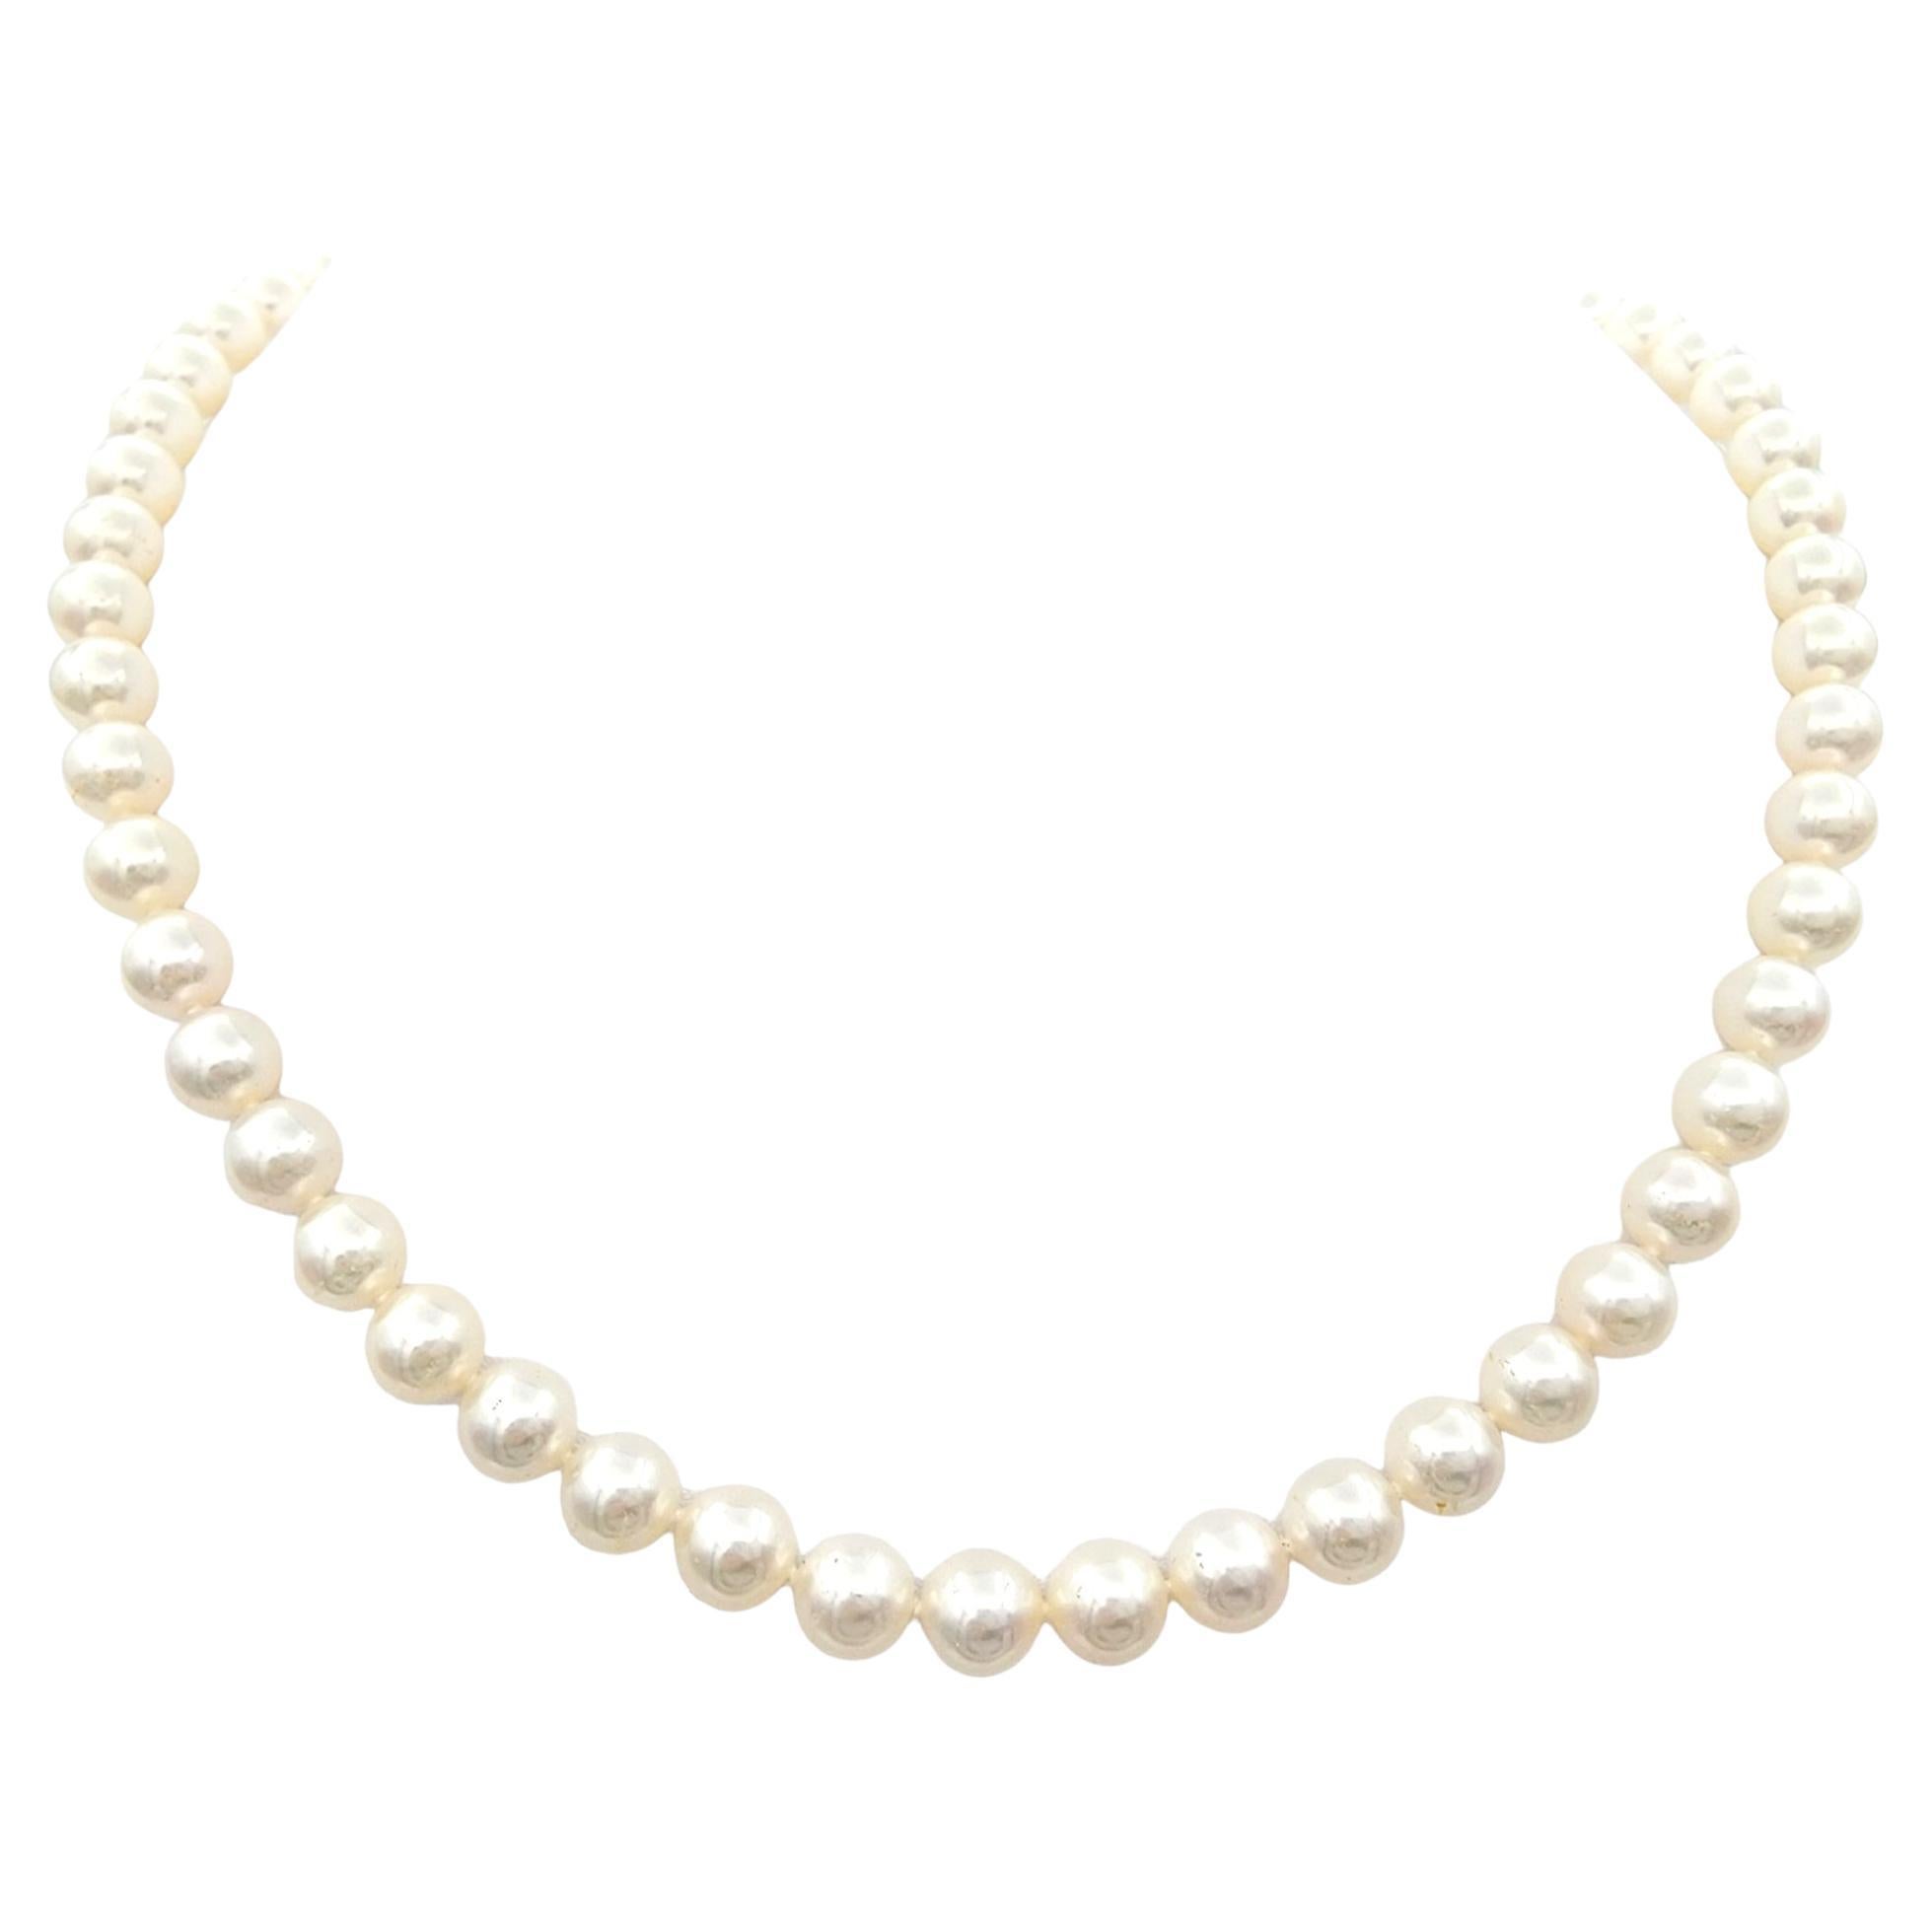 Mikimoto 16" Akoya Pearl Strand Necklace with 18 Karat White Gold Clasp For Sale